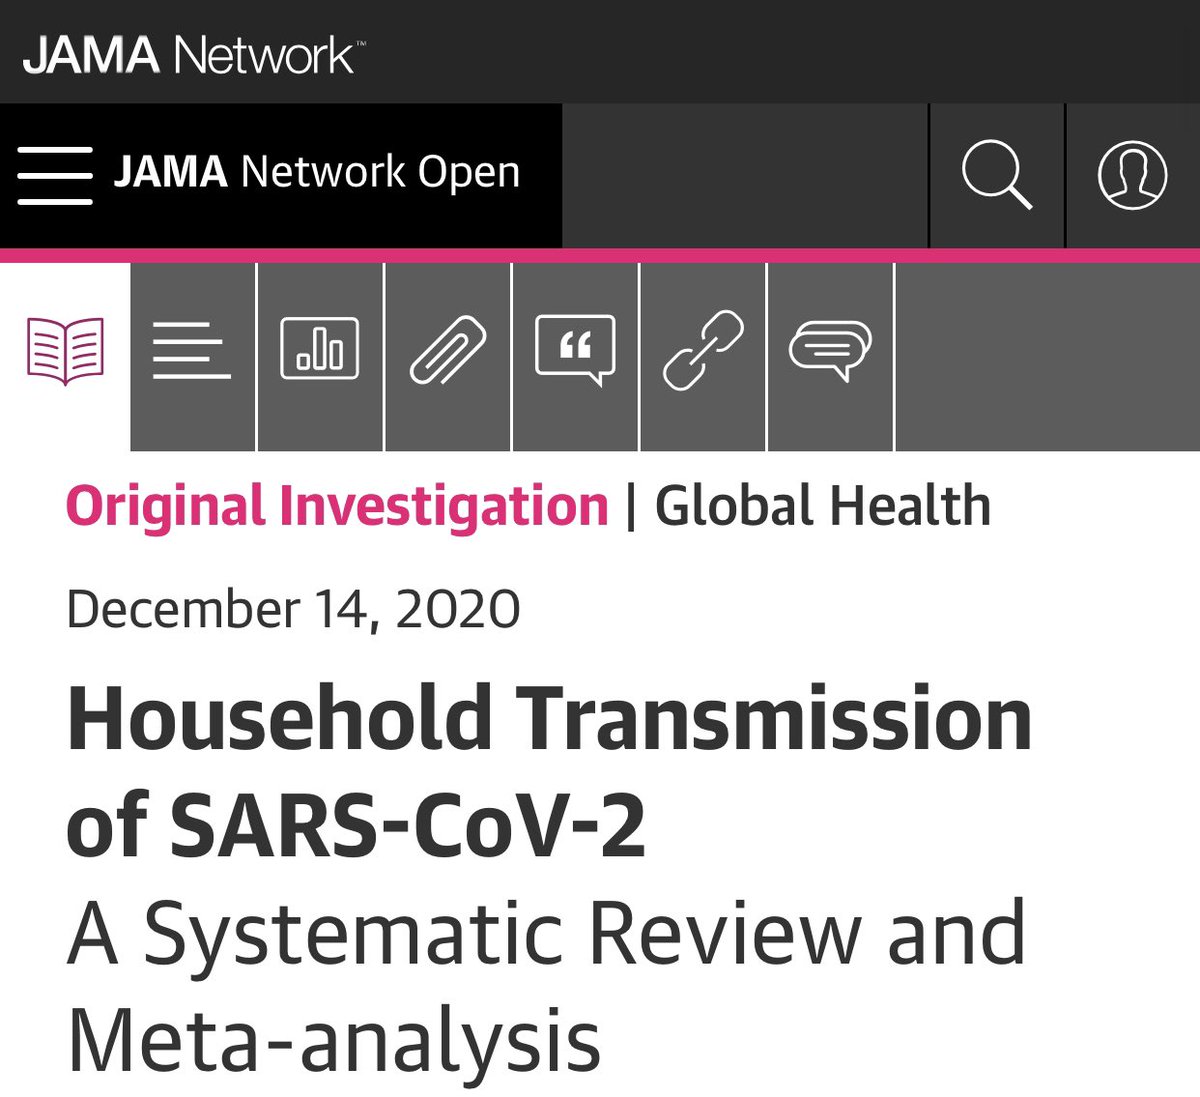 Now let’s look at the latest study on transmission of COVID-19 in households, published this week in the Journal of the American Medical Association (JAMA) #COVID19  #Coronavirus  #lockdown  #pandemic  #science  #data  #Canada  #Ontario  #canpoli  #onpoli  #virus  #transmission